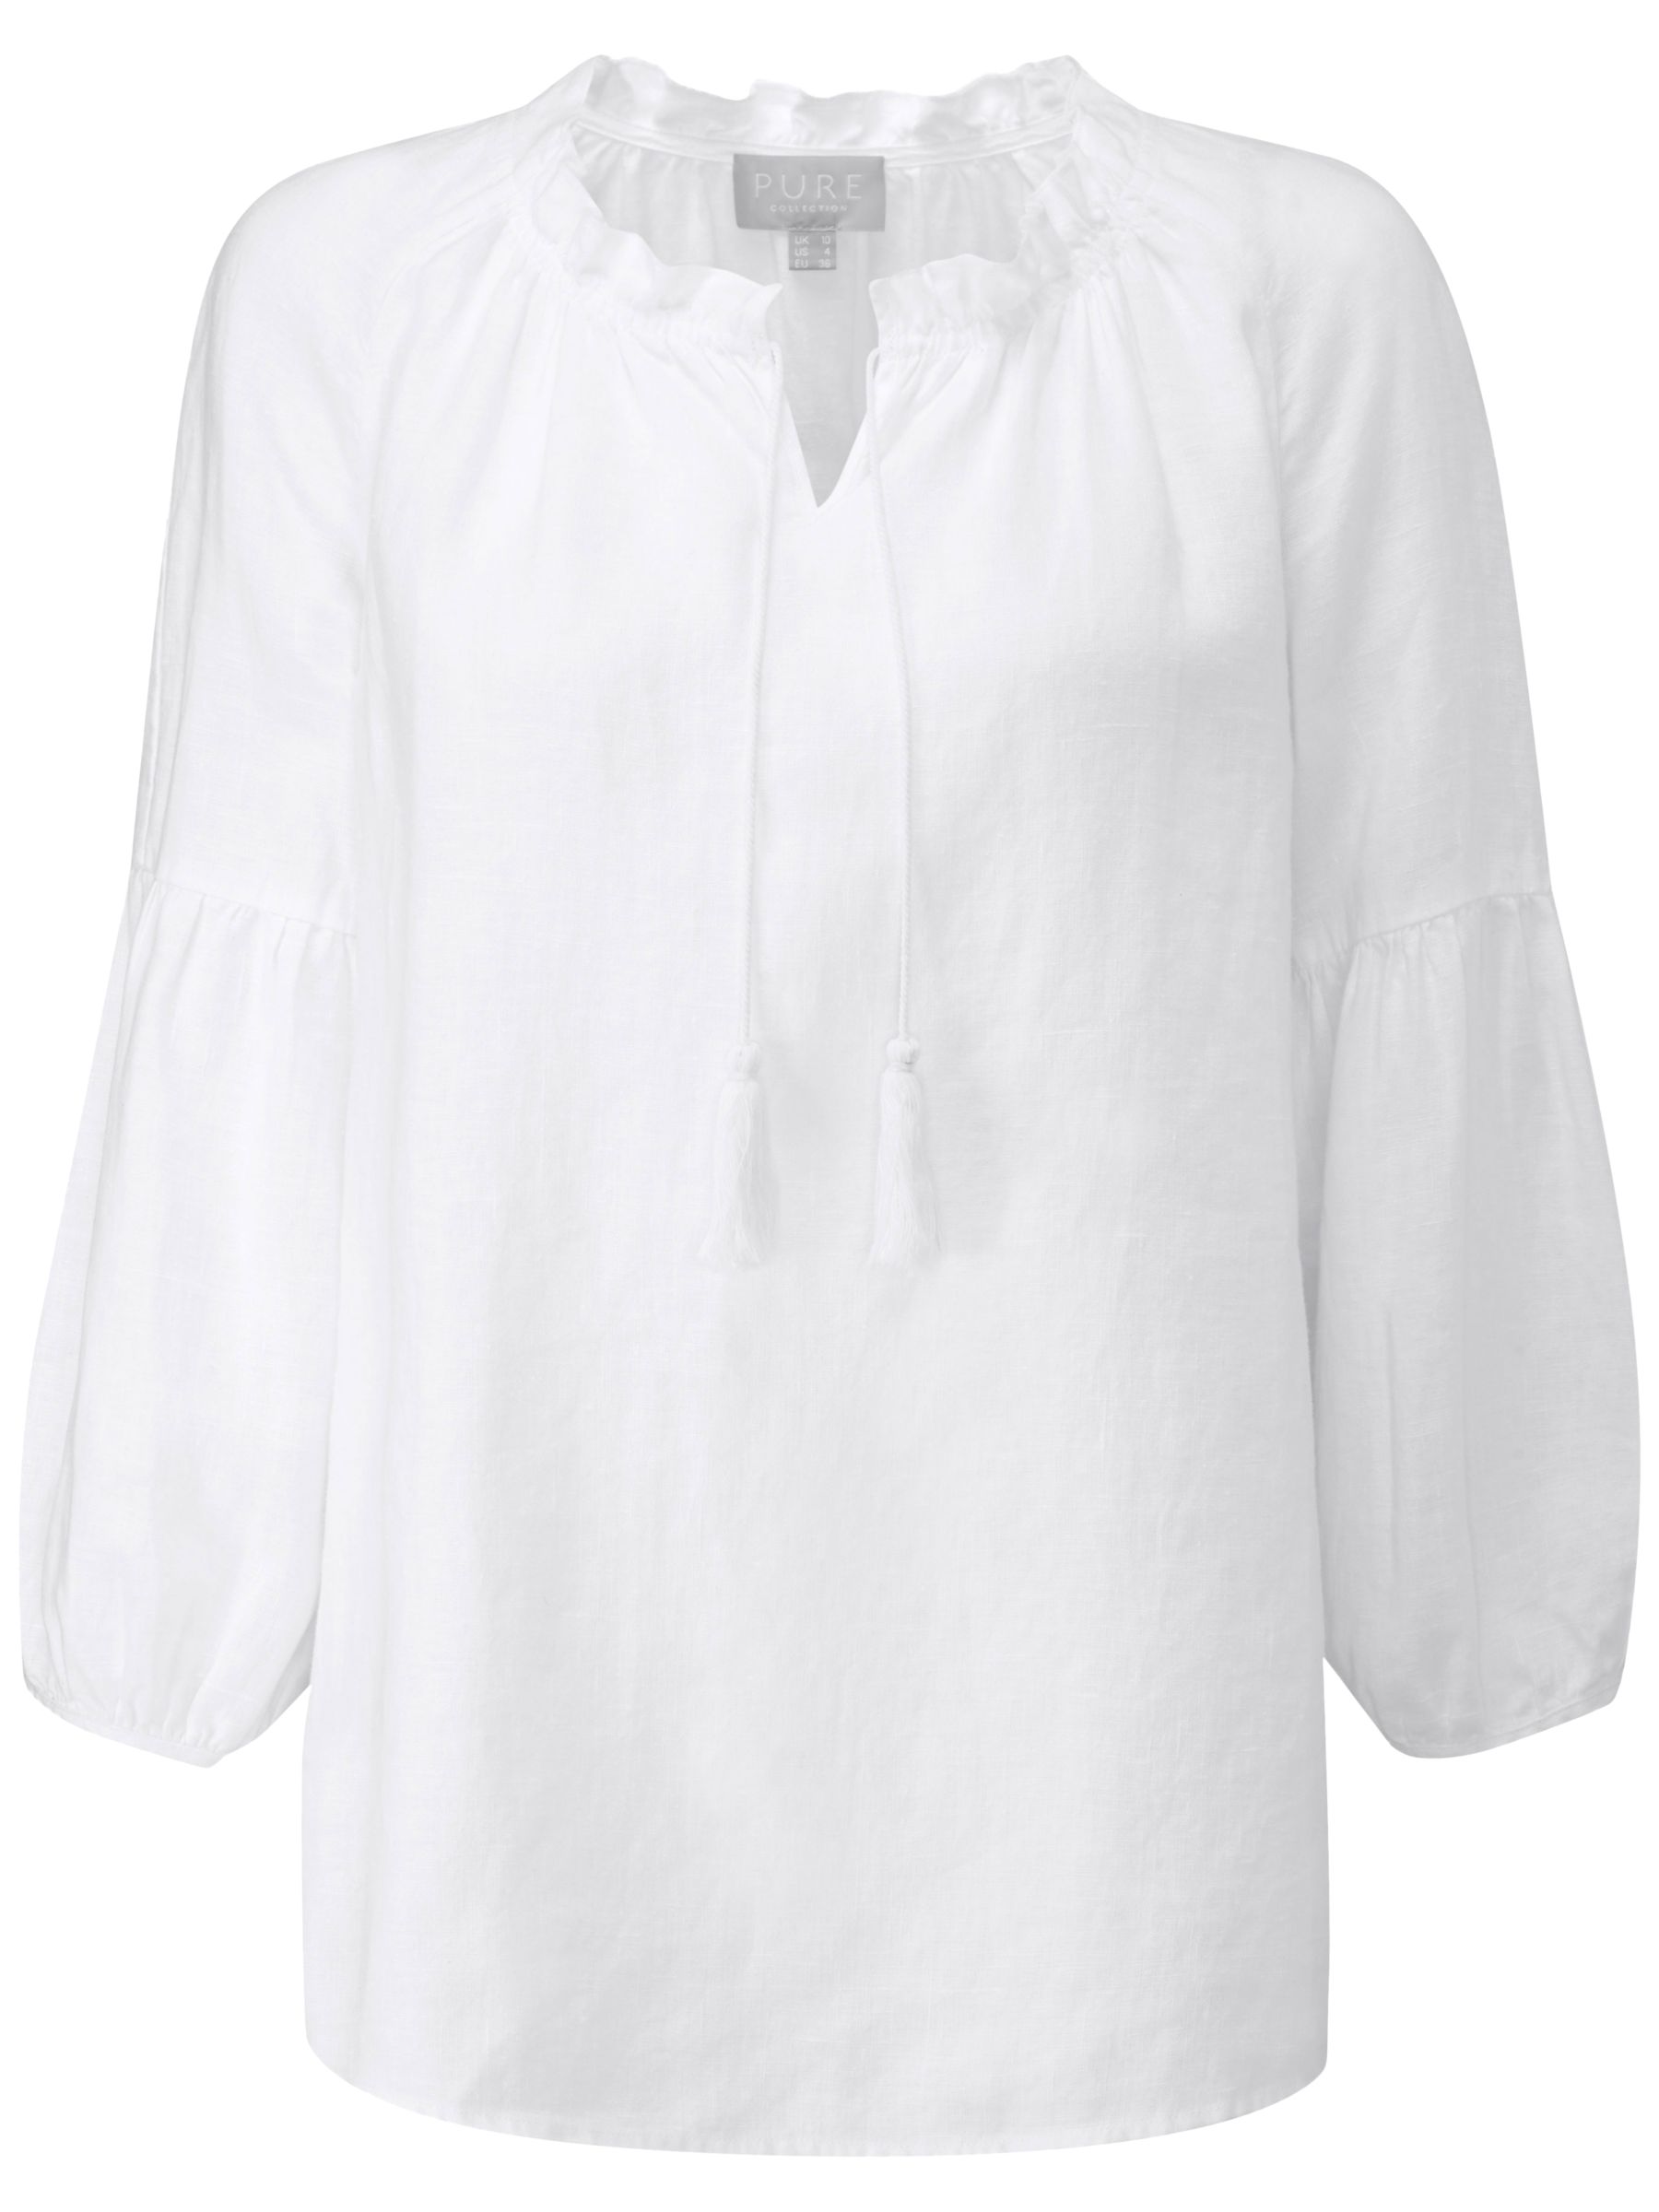 Pure Collection Laundered Linen Tassel Blouse, White at John Lewis ...